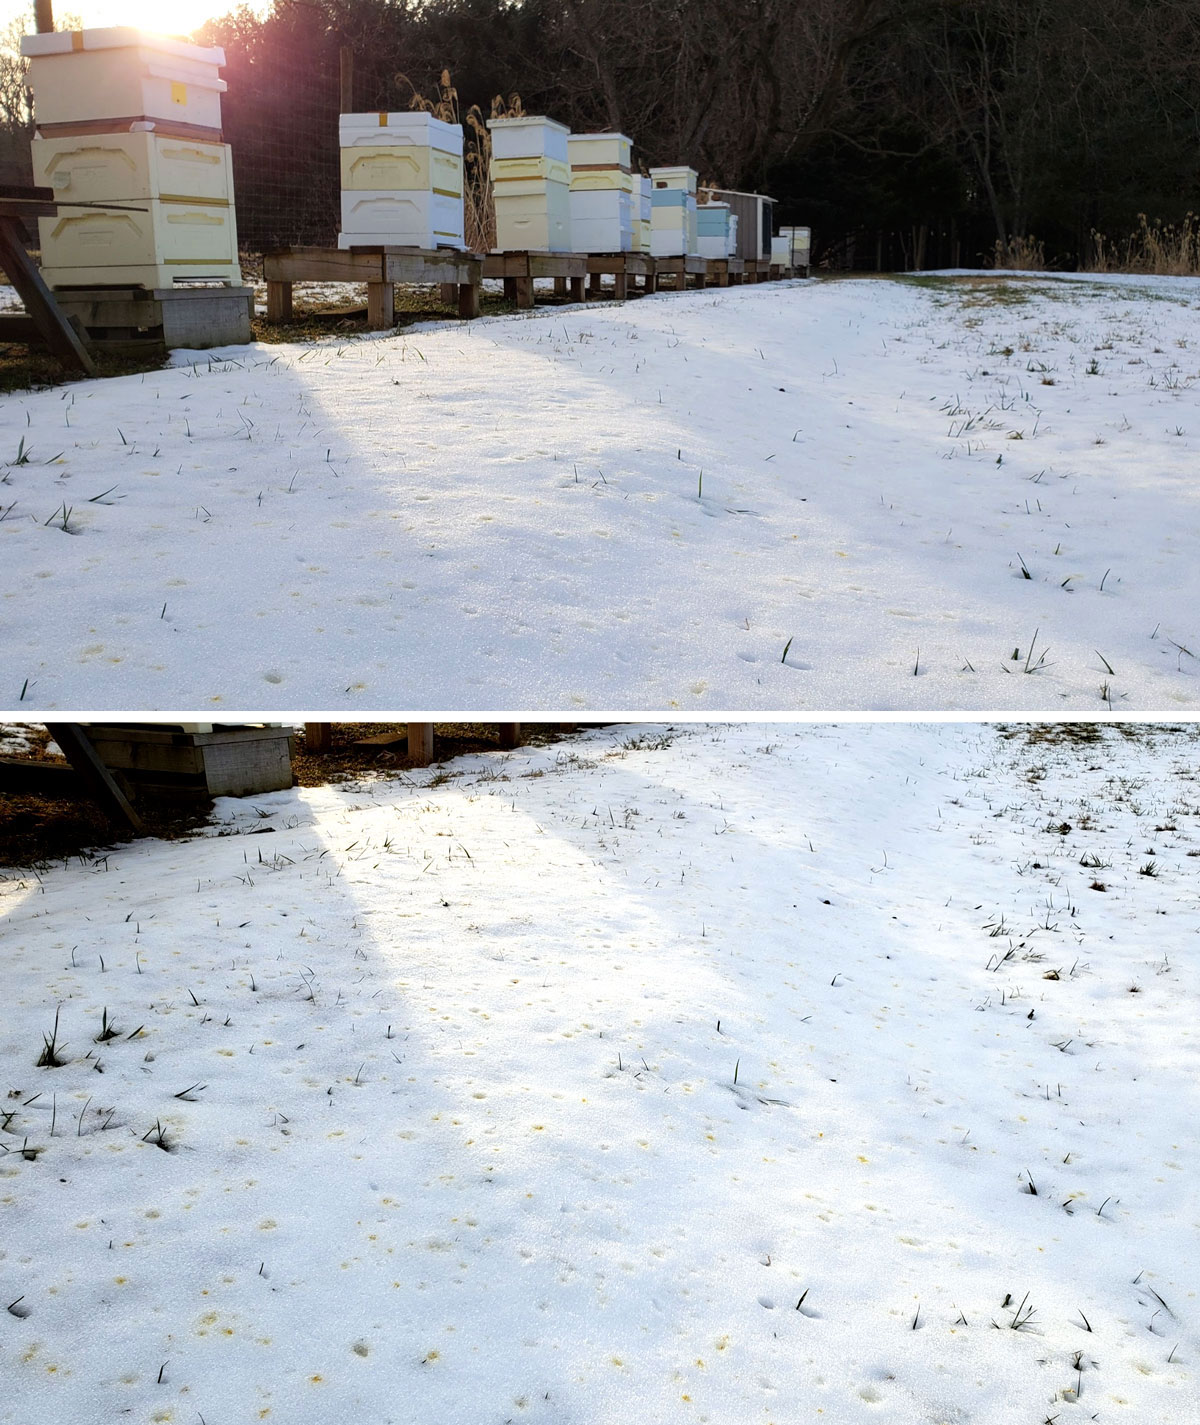 Image of yellow dots in the snow, evidence that the bees have been taking cleansing flights.